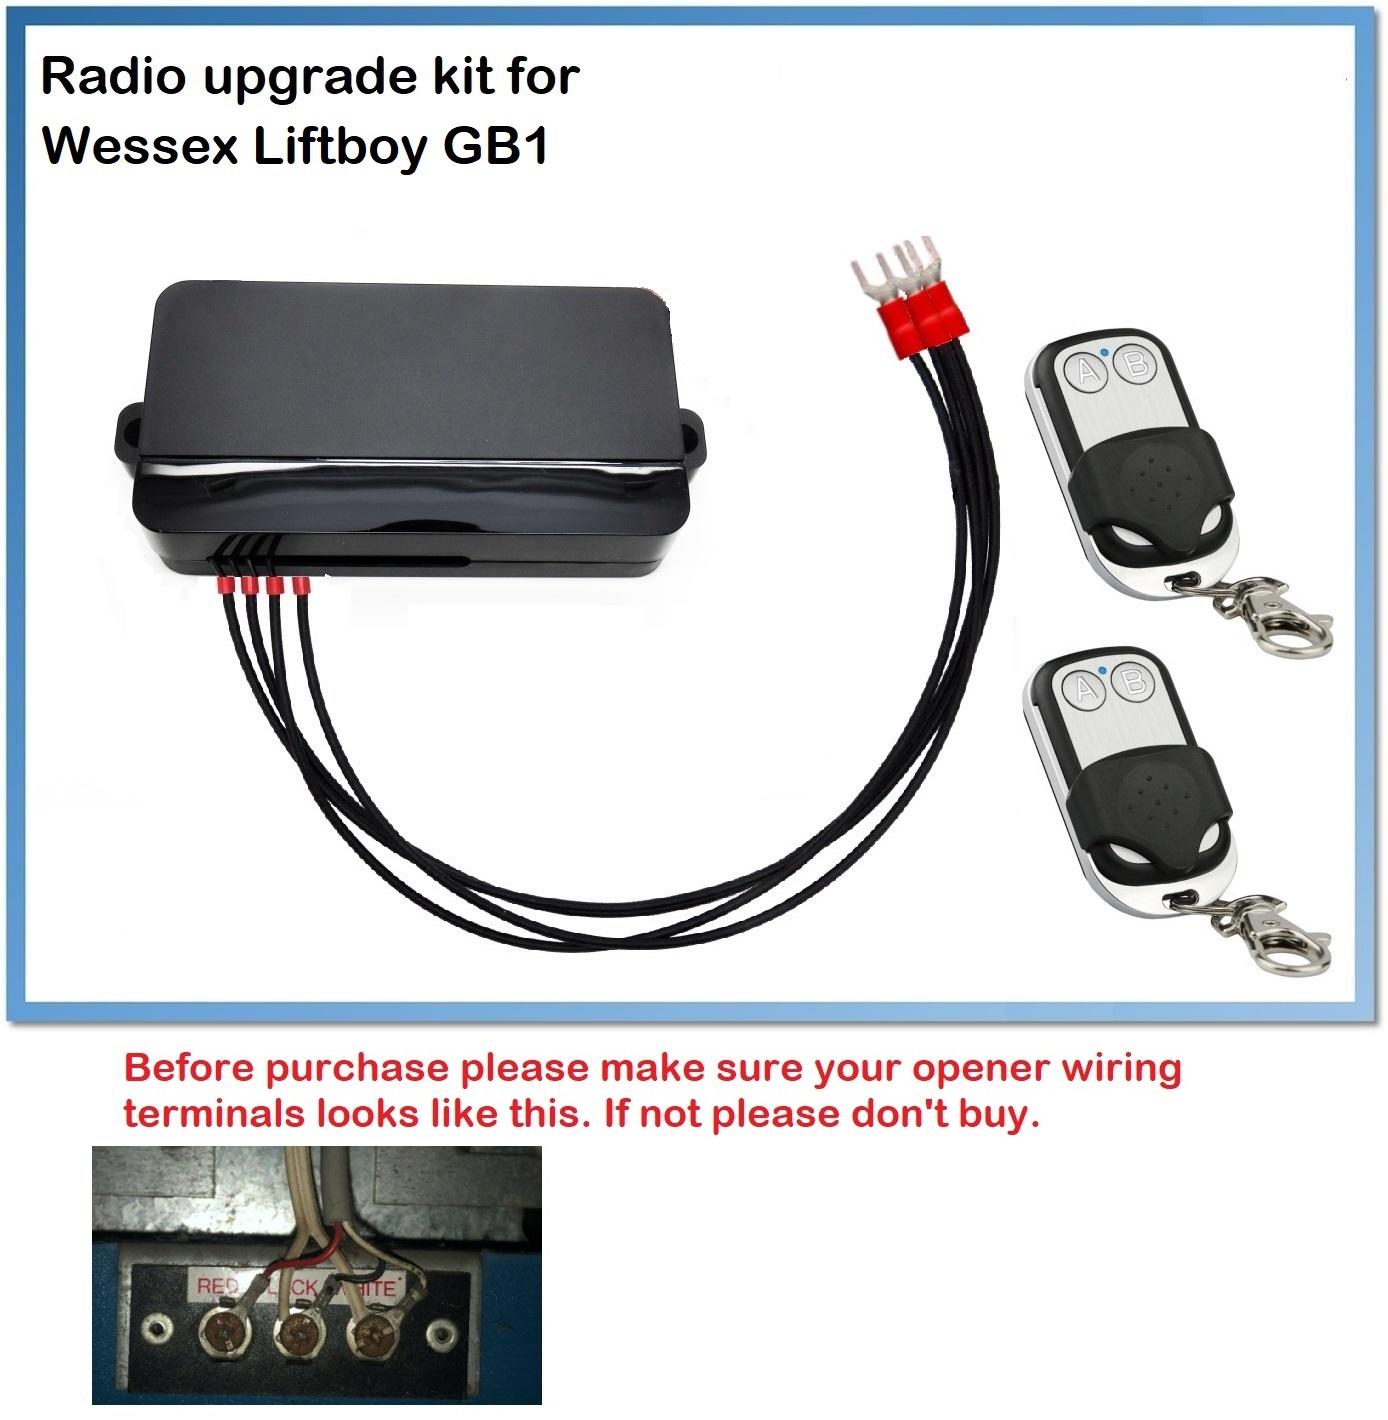 New Remotes Wessex Liftboy Garage Gate Replacement Receiver Upgrade Kit 